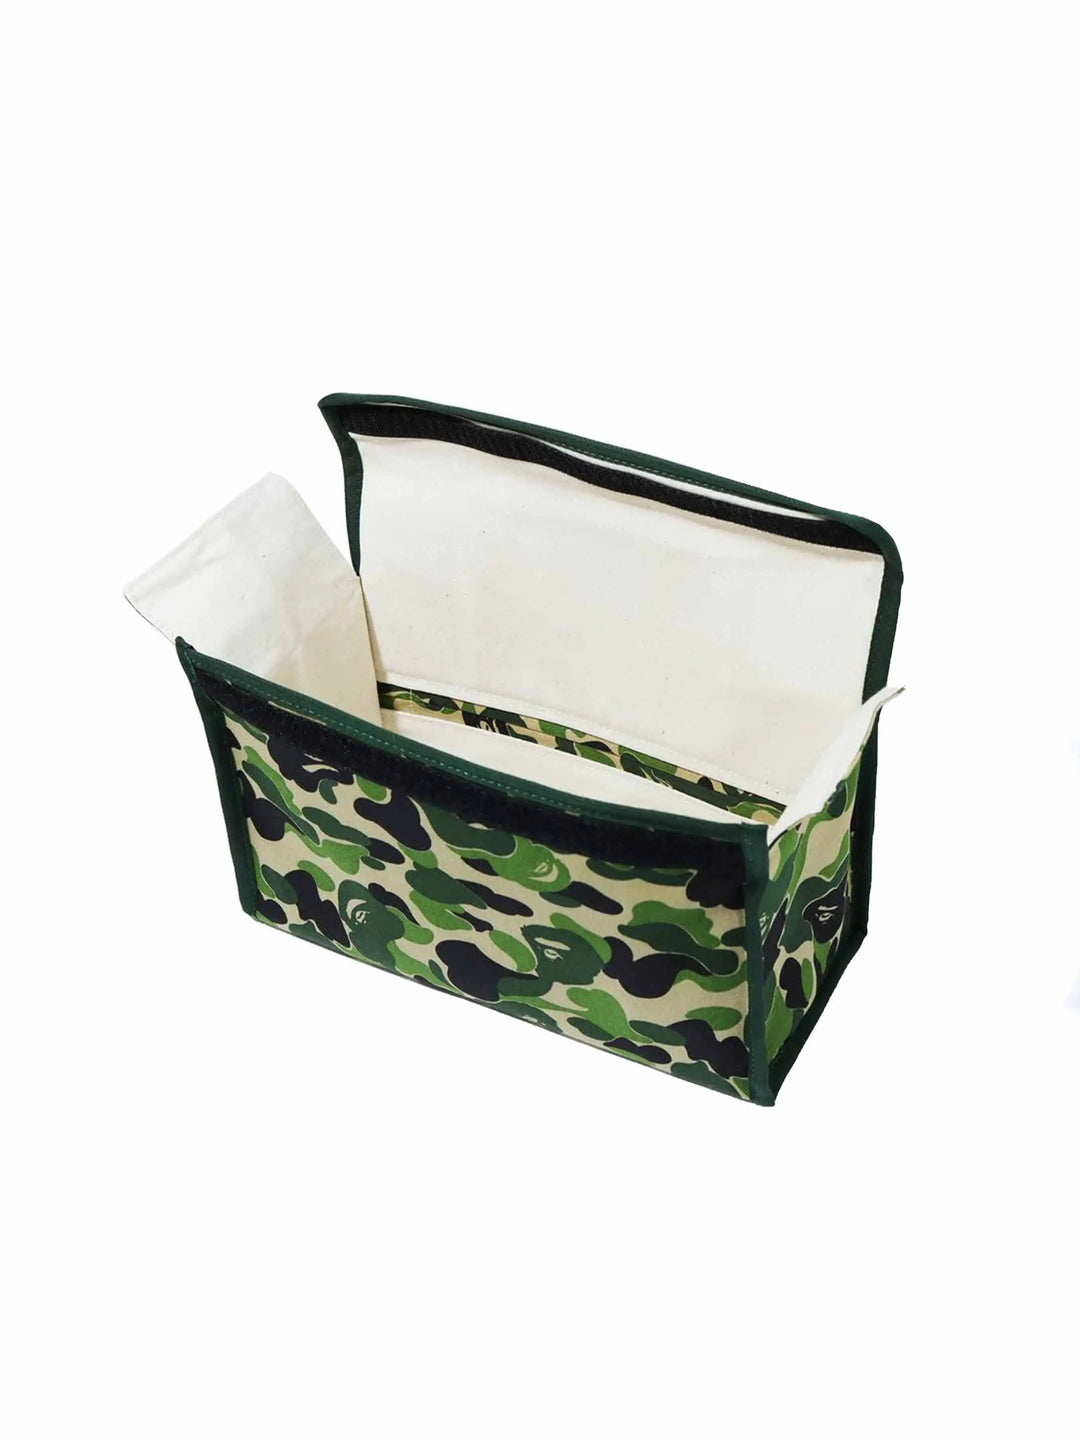 A Bathing Ape ABC Camo Tissue Cover Green in Auckland, New Zealand - Shop name